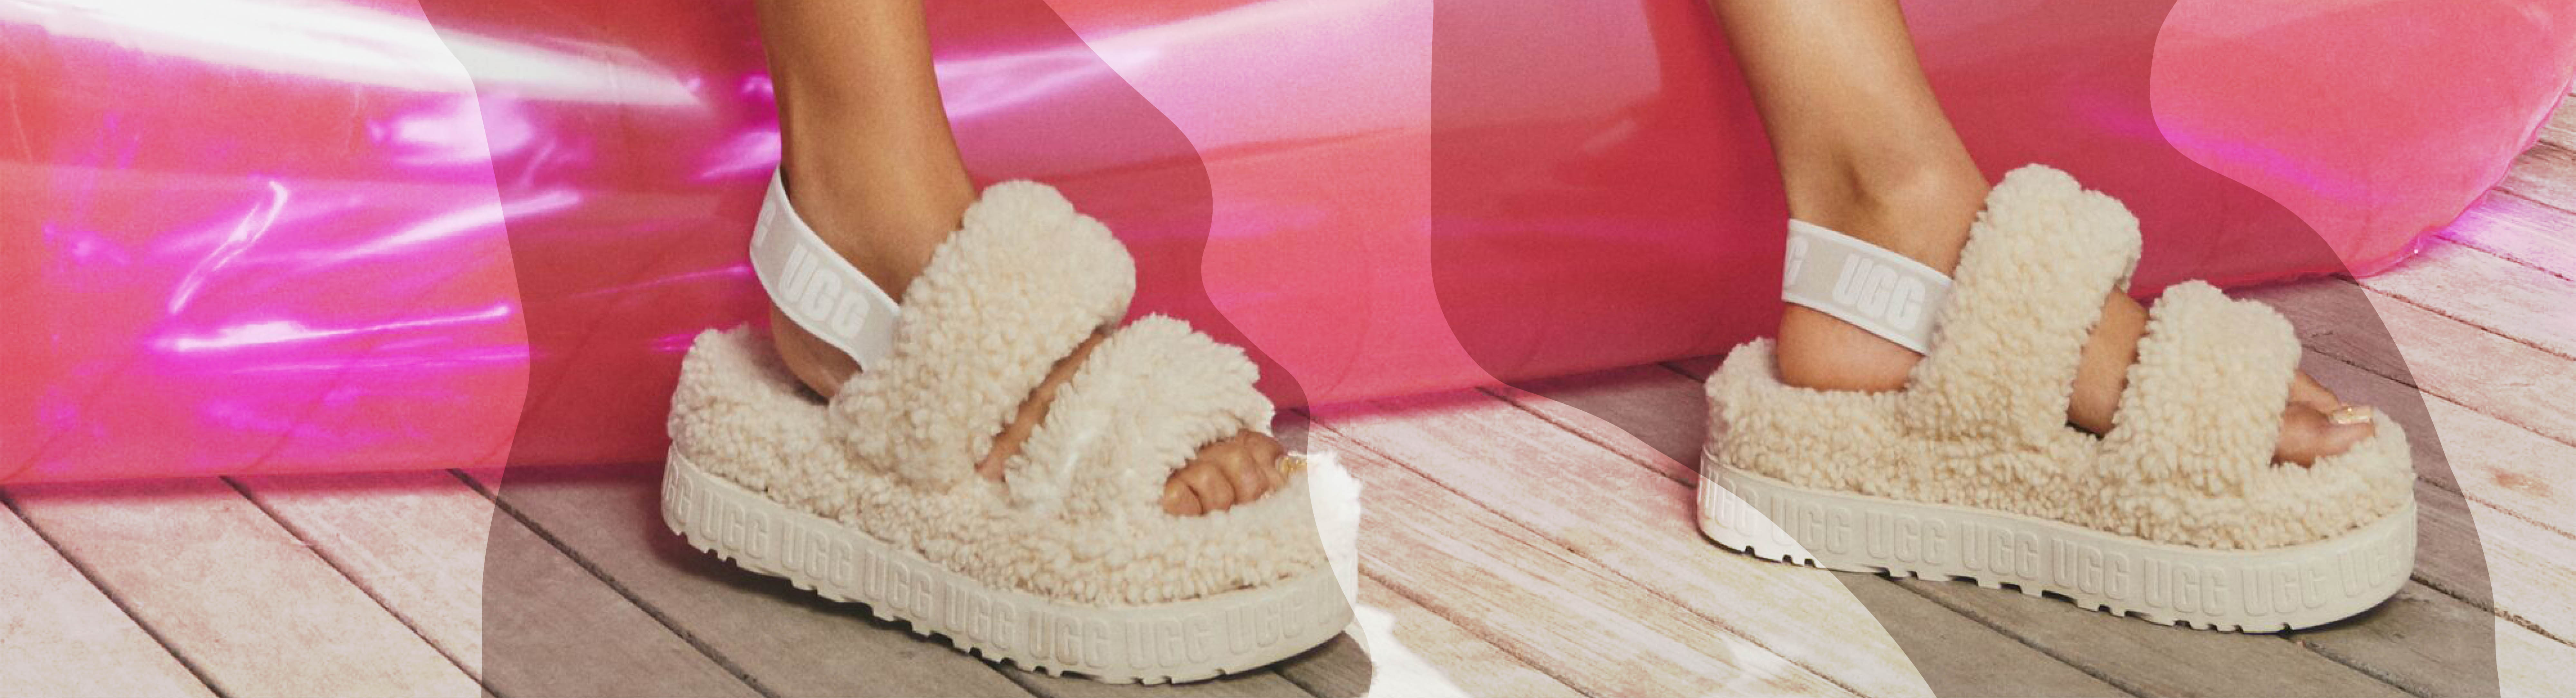 person ankles down wearing fluffy fluffita slippers